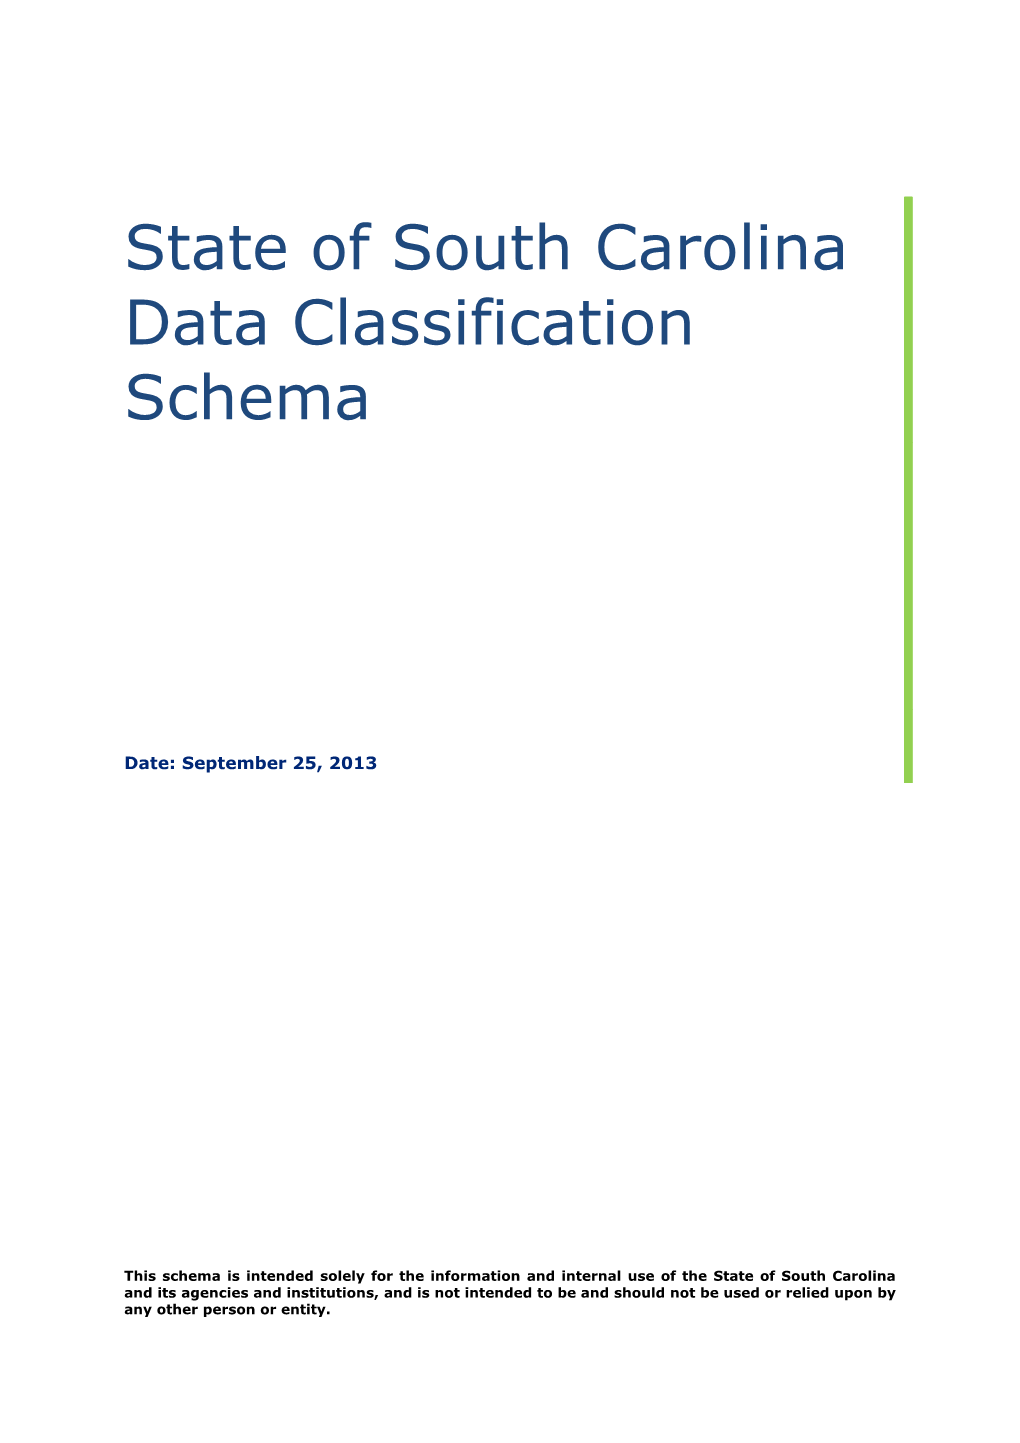 This Schema Is Intended Solely for the Information and Internal Use of the State of South